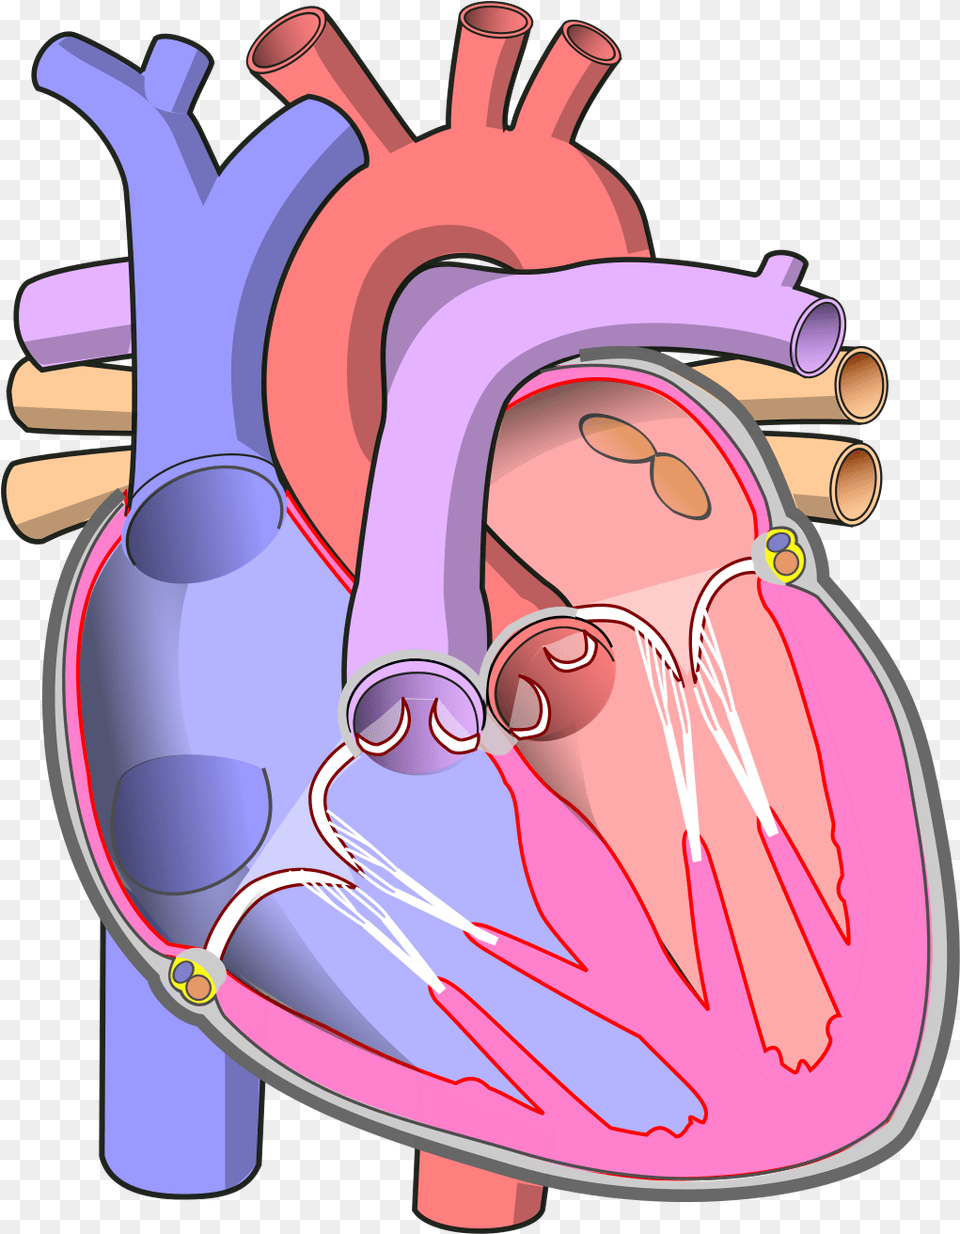 Diagram Of The Human Heart Human Heart, Dynamite, Weapon, Accessories, Glasses Free Png Download